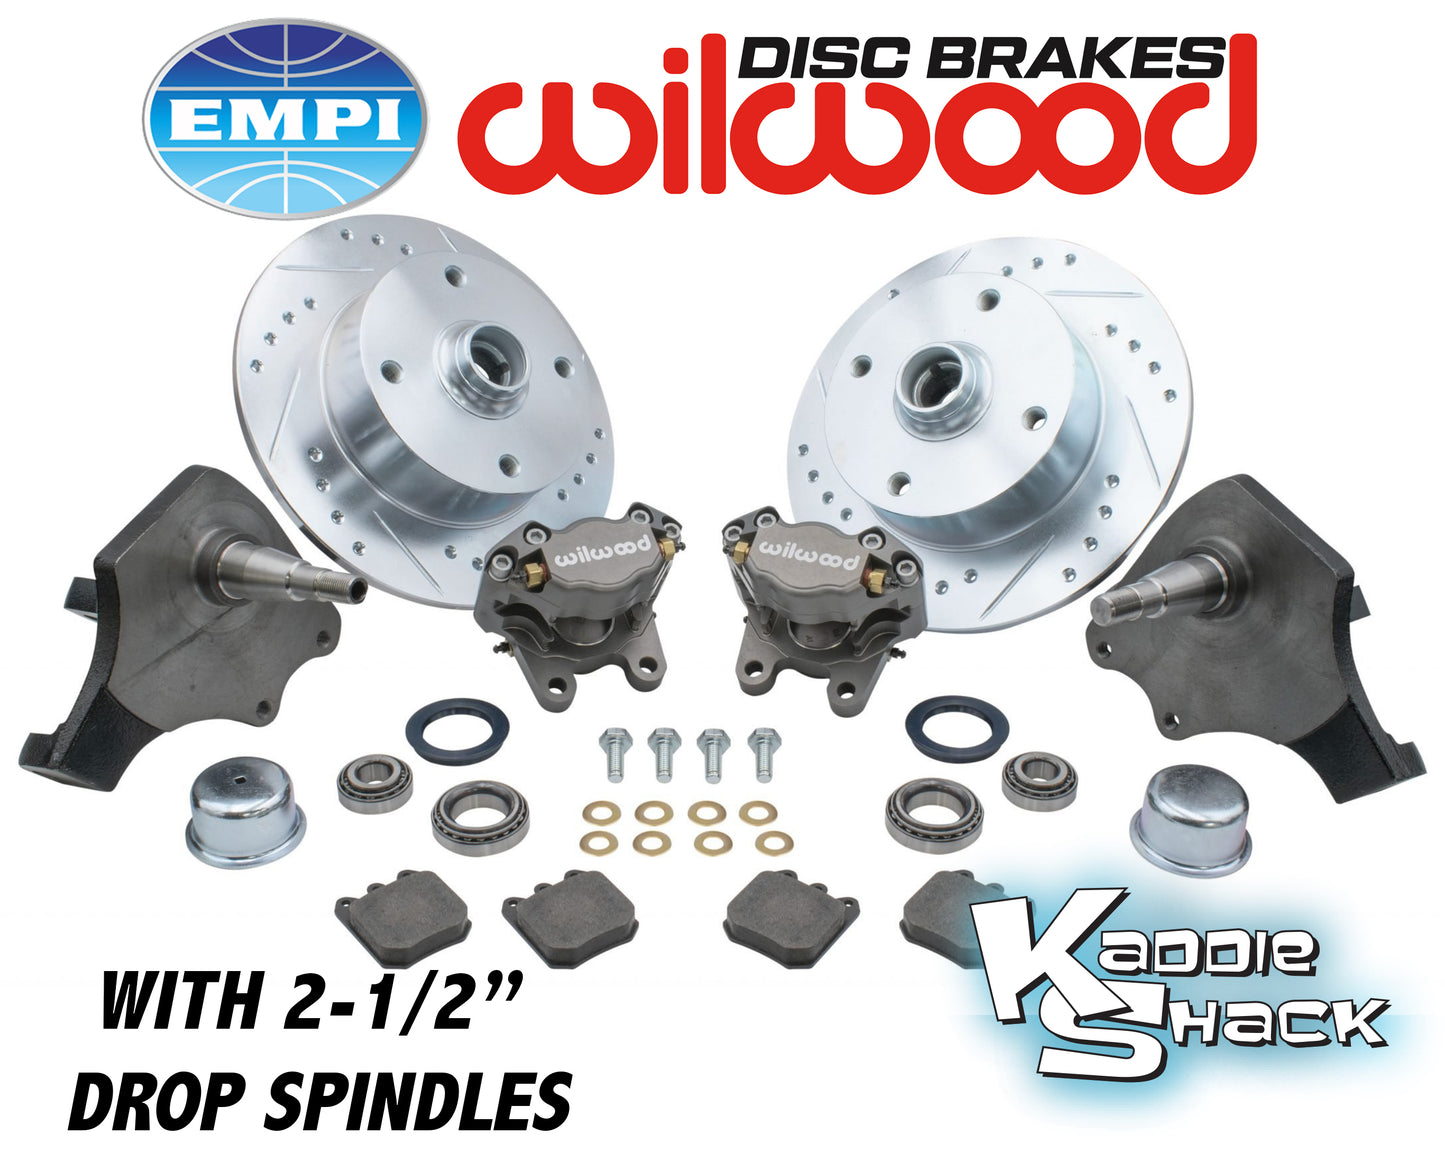 EMPI Wilwood Brakes w/ 2-1/2" Drop Spindles, BJ 4x130 Silver